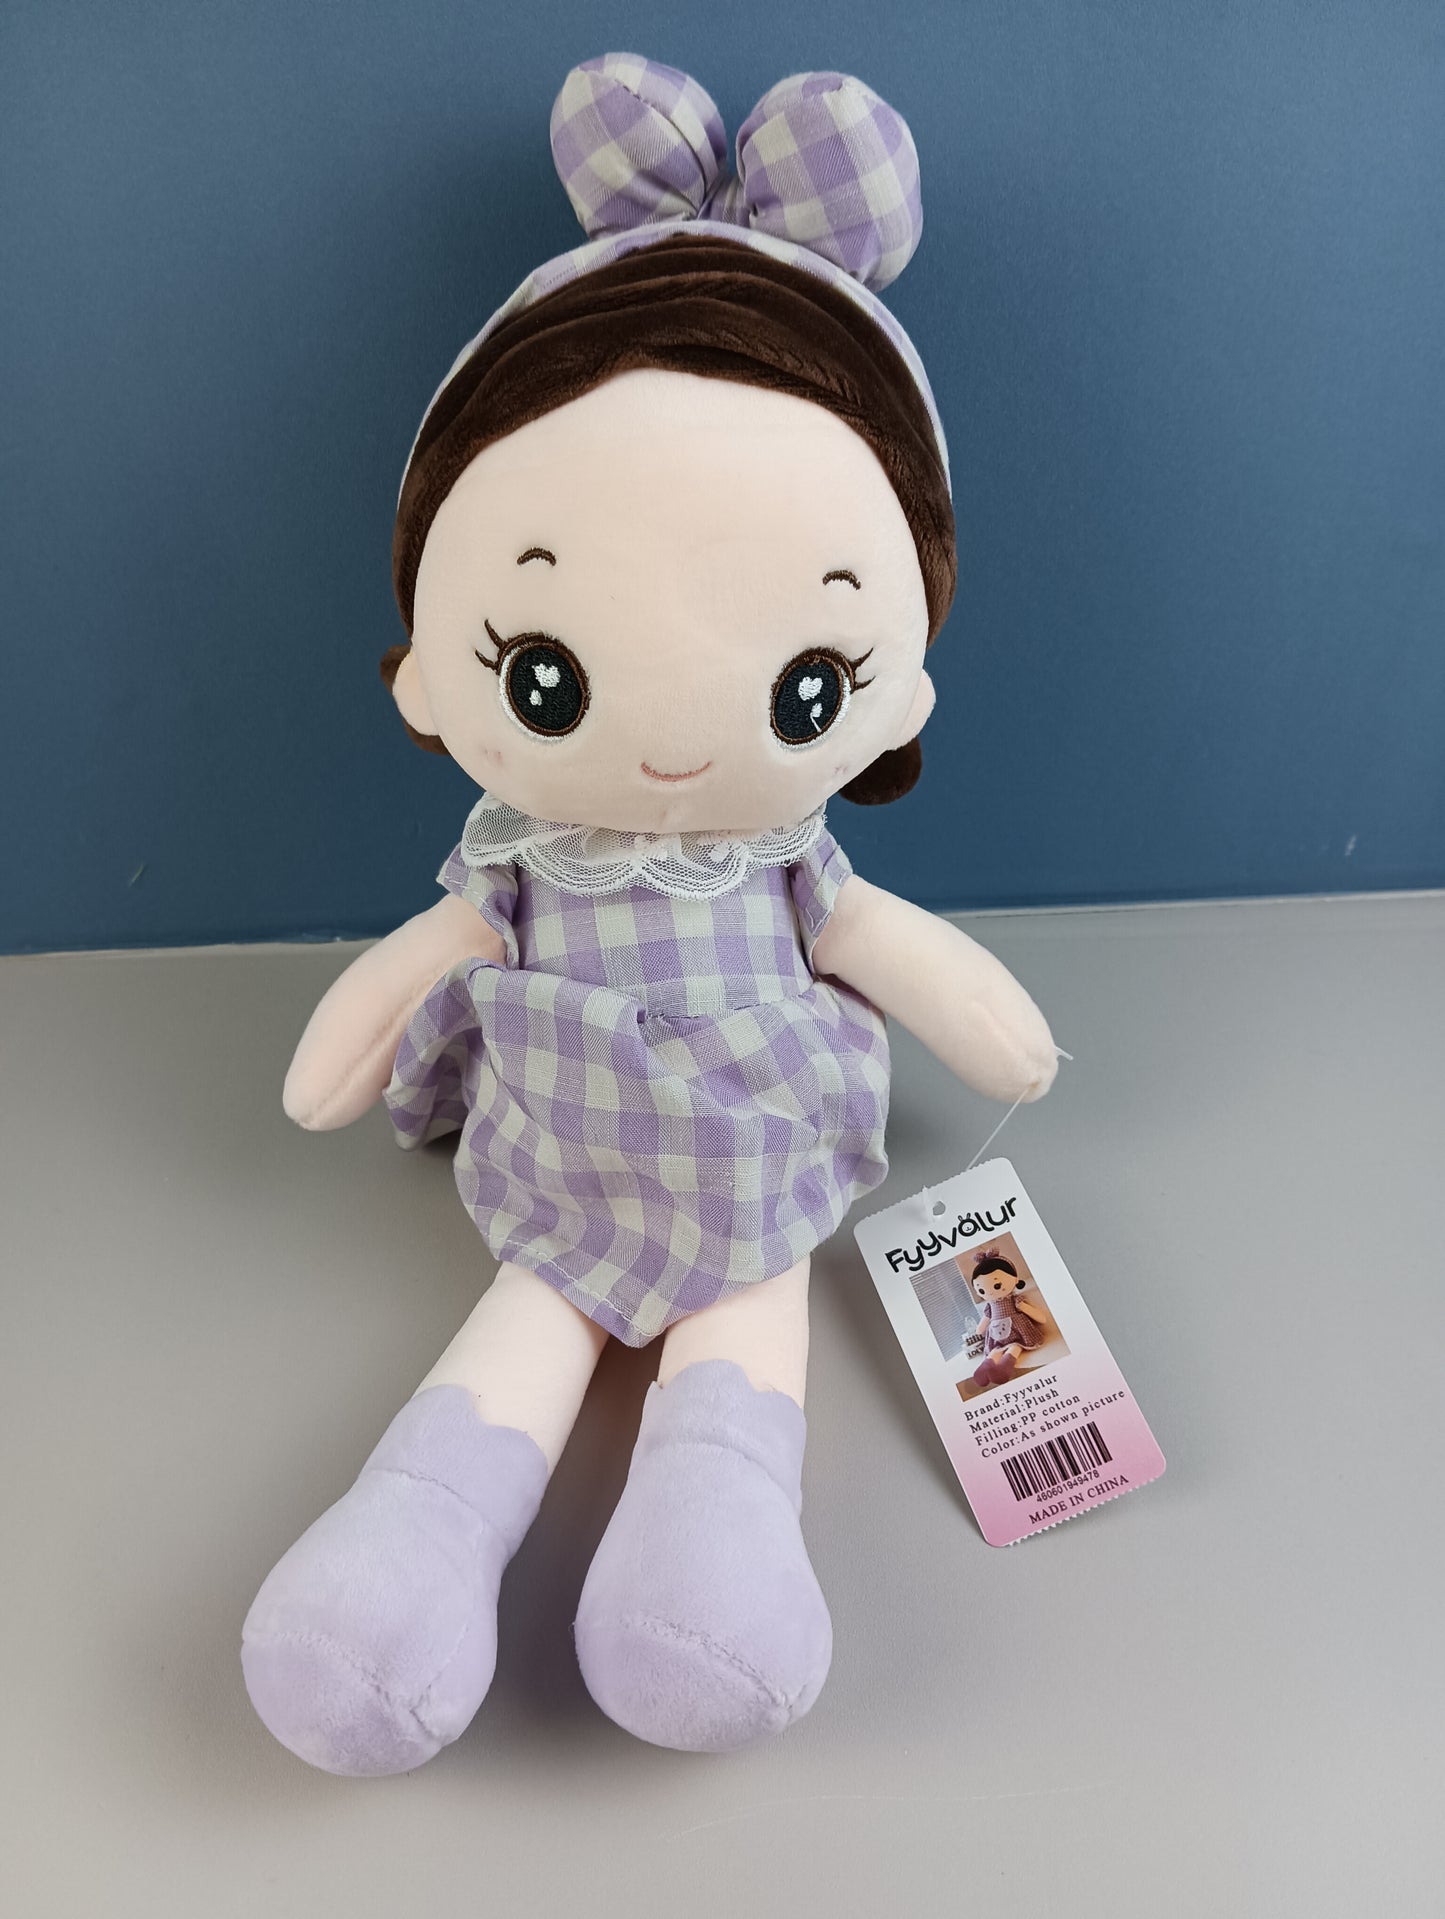 Fyyvalur Dolls for playing, 40cm, PP Cotton Filled, Ages 2+, Soft and Cute, Girls' Warm Companion